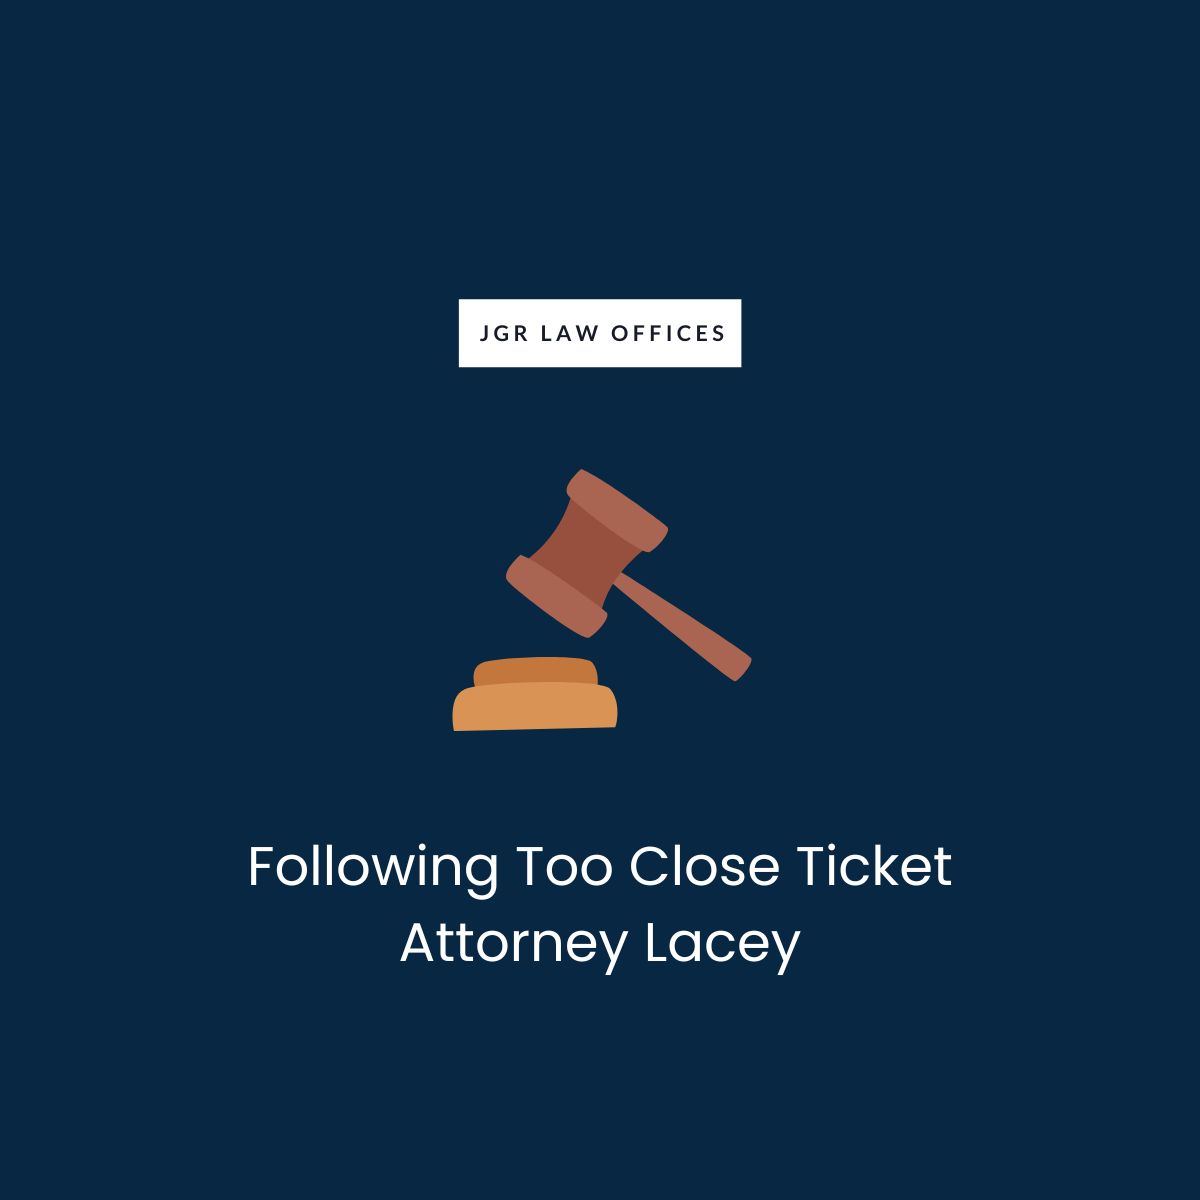 Following Too Close Ticket Attorney Lacey